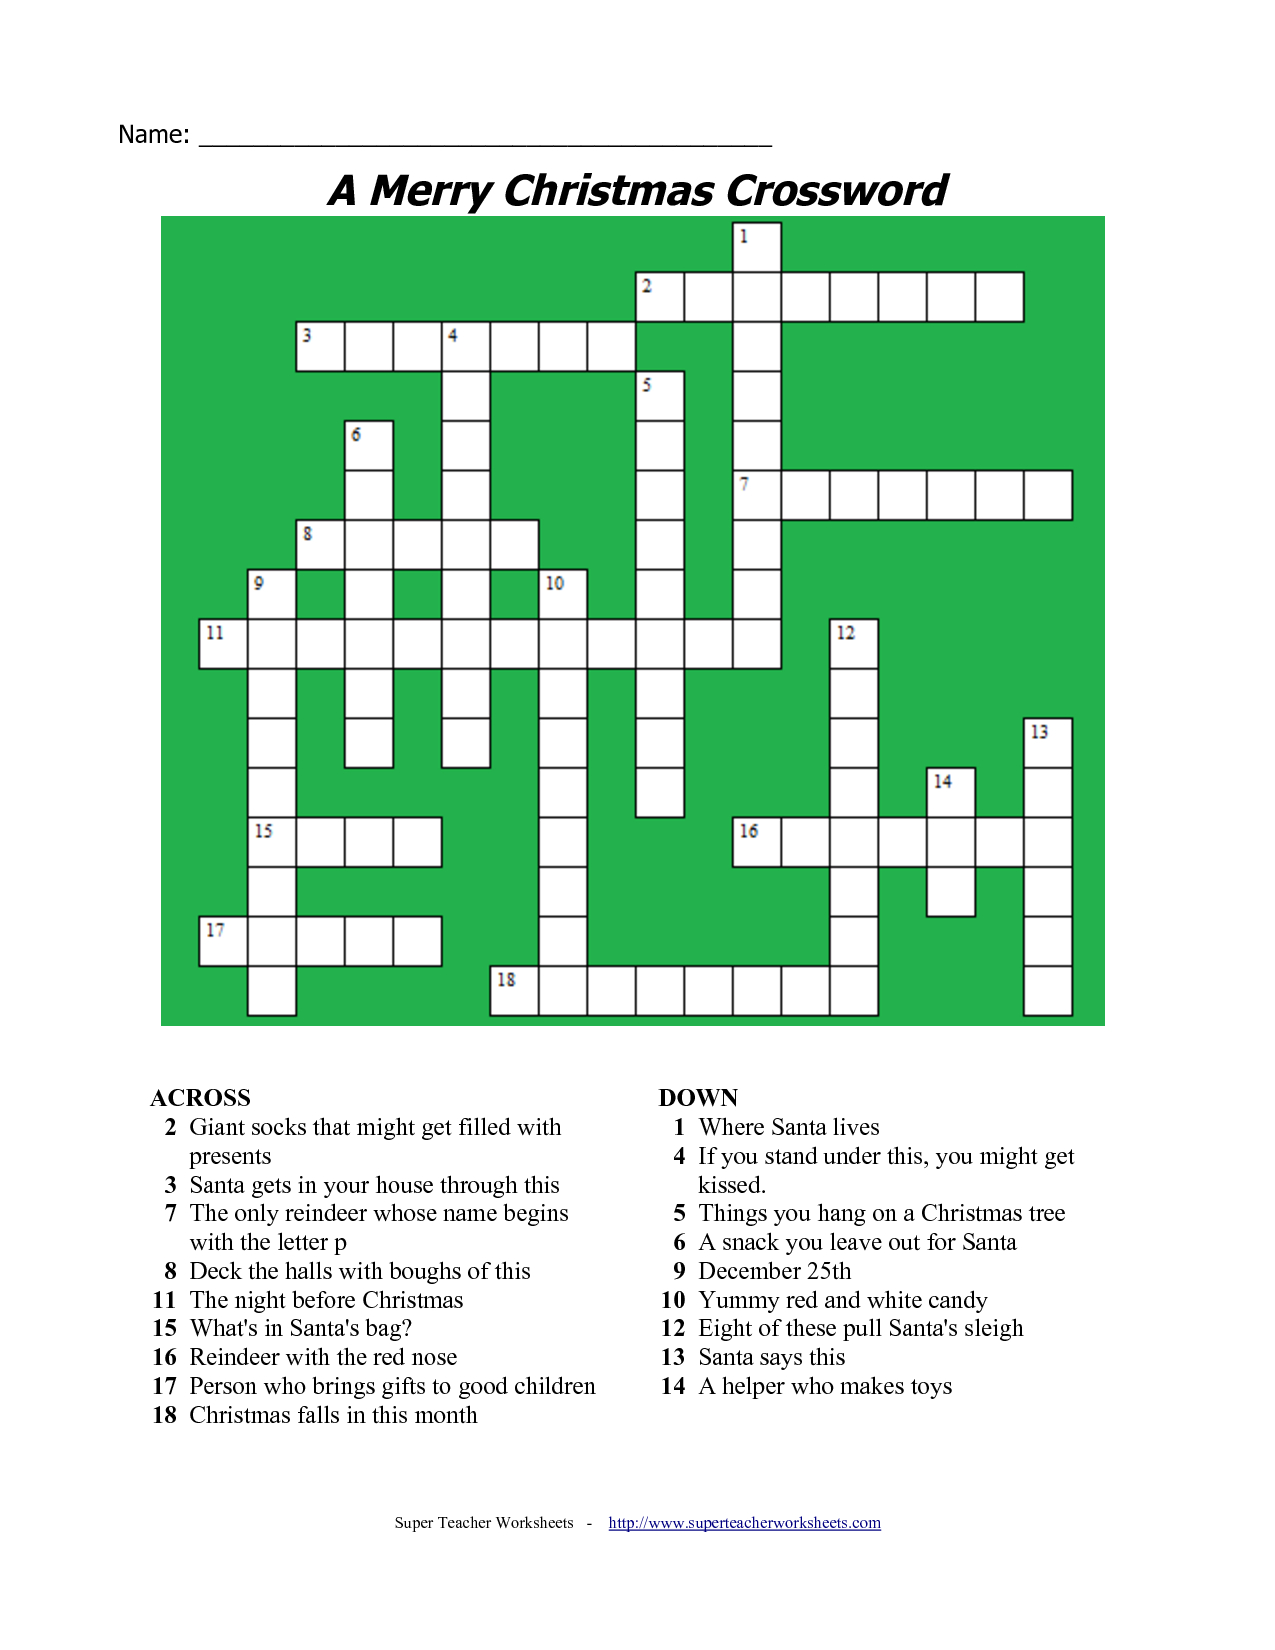 20 Fun Printable Christmas Crossword Puzzles | Kittybabylove - Printable Christmas Crossword Puzzles For Adults